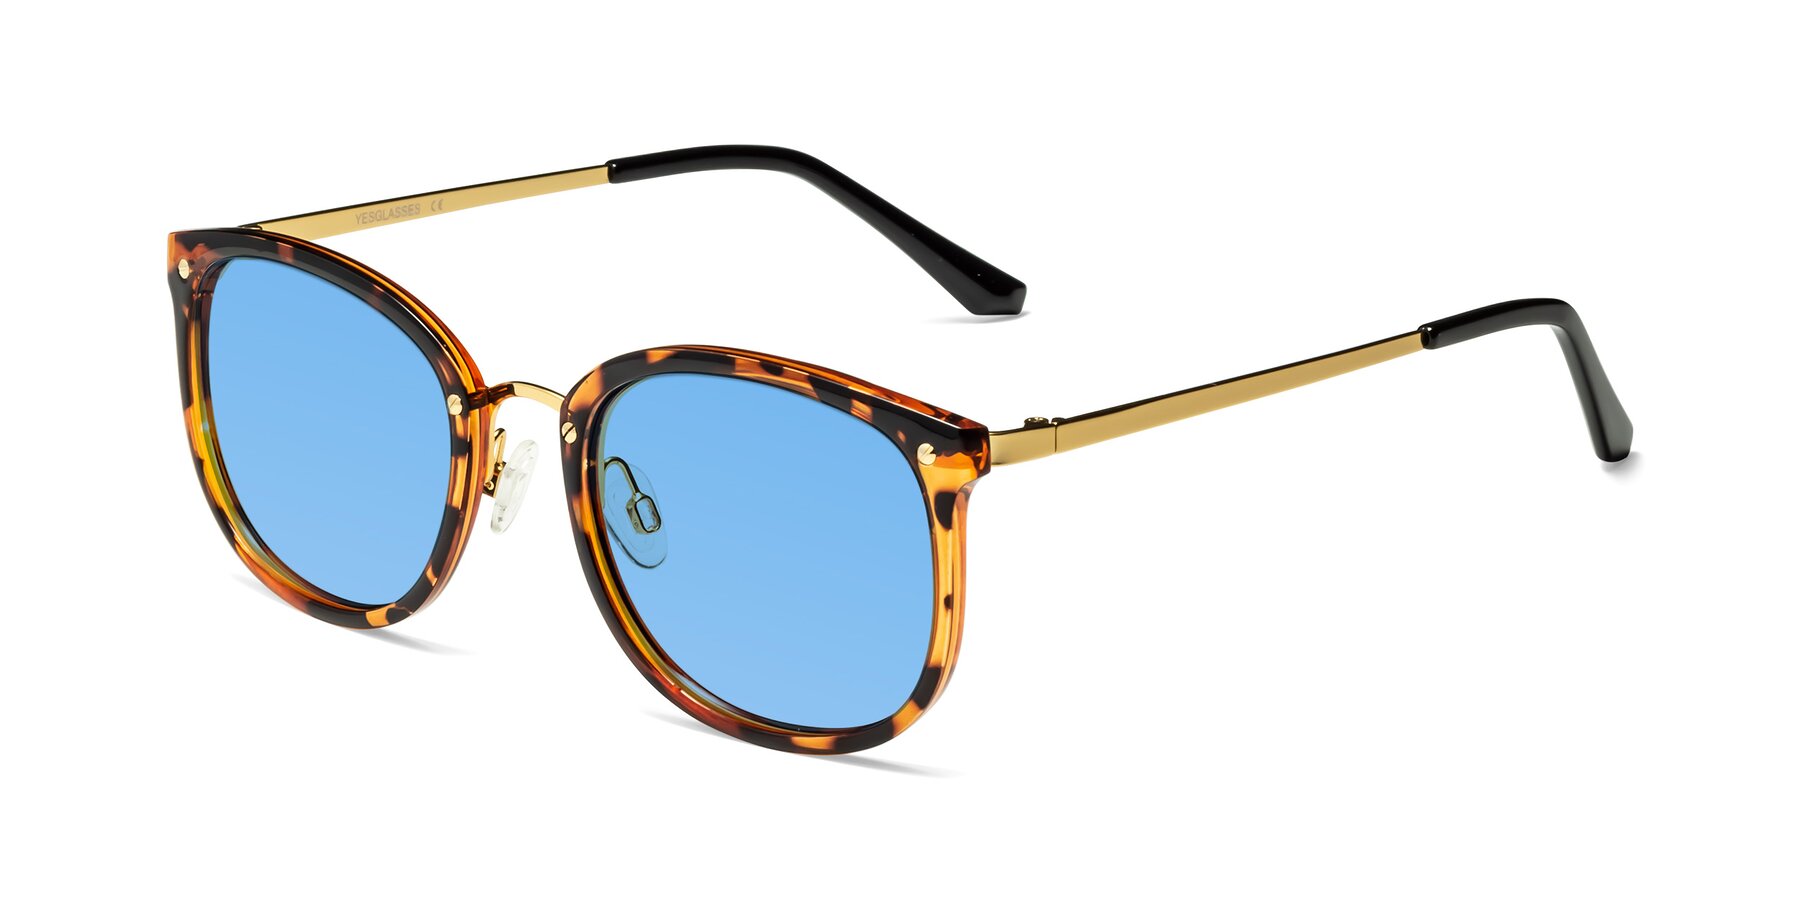 Angle of Timeless in Tortoise-Golden with Medium Blue Tinted Lenses